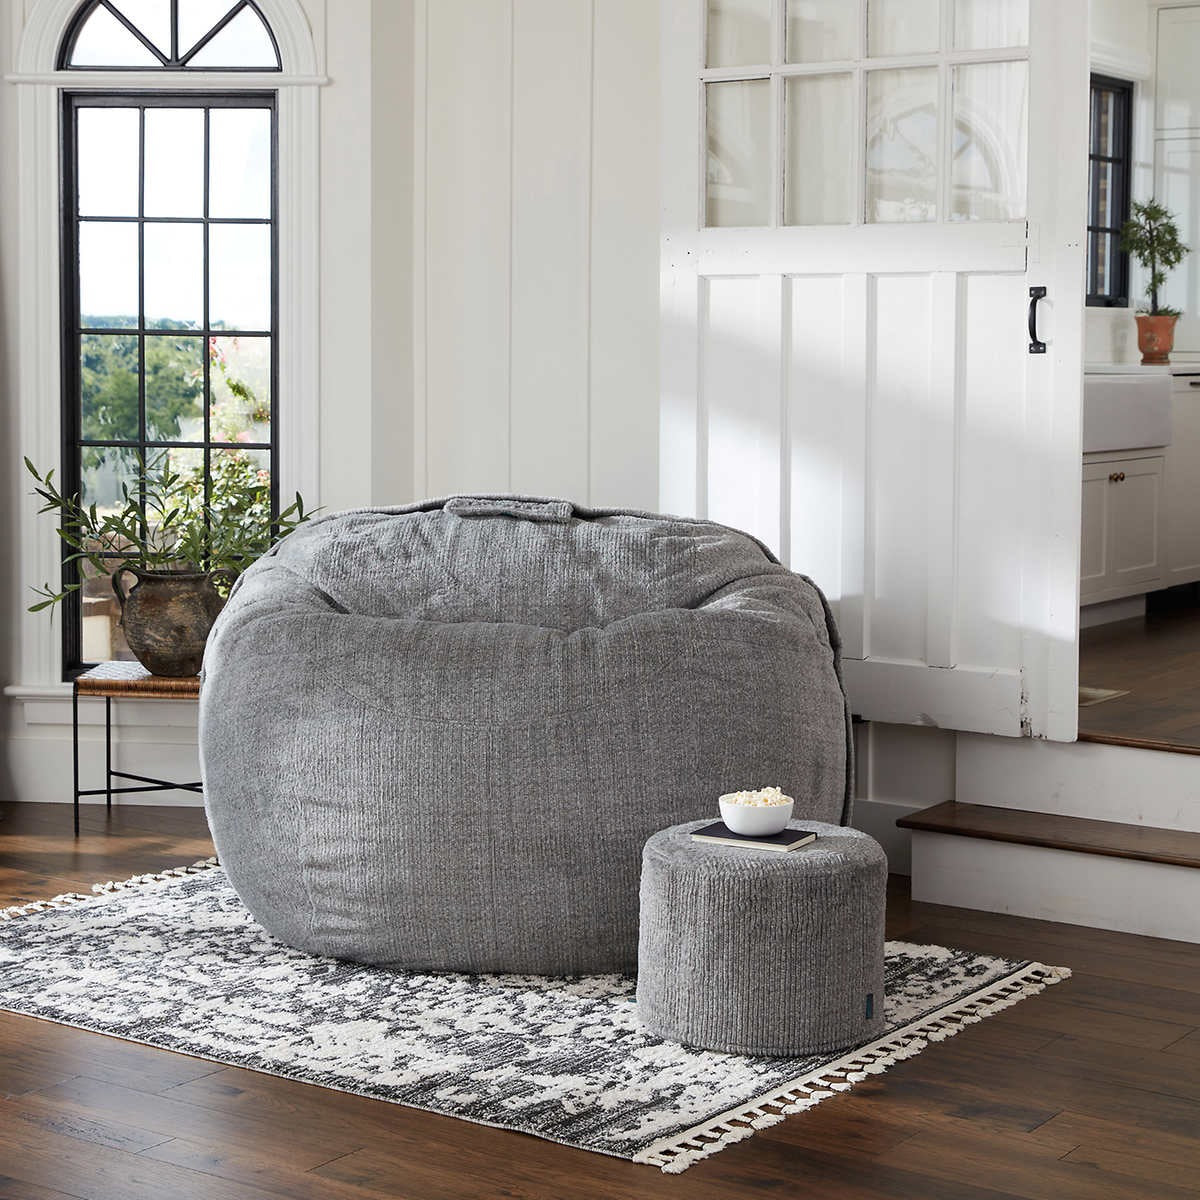 The World’s Most Comfortable Seat LoveSac City Sac Bundle with ...